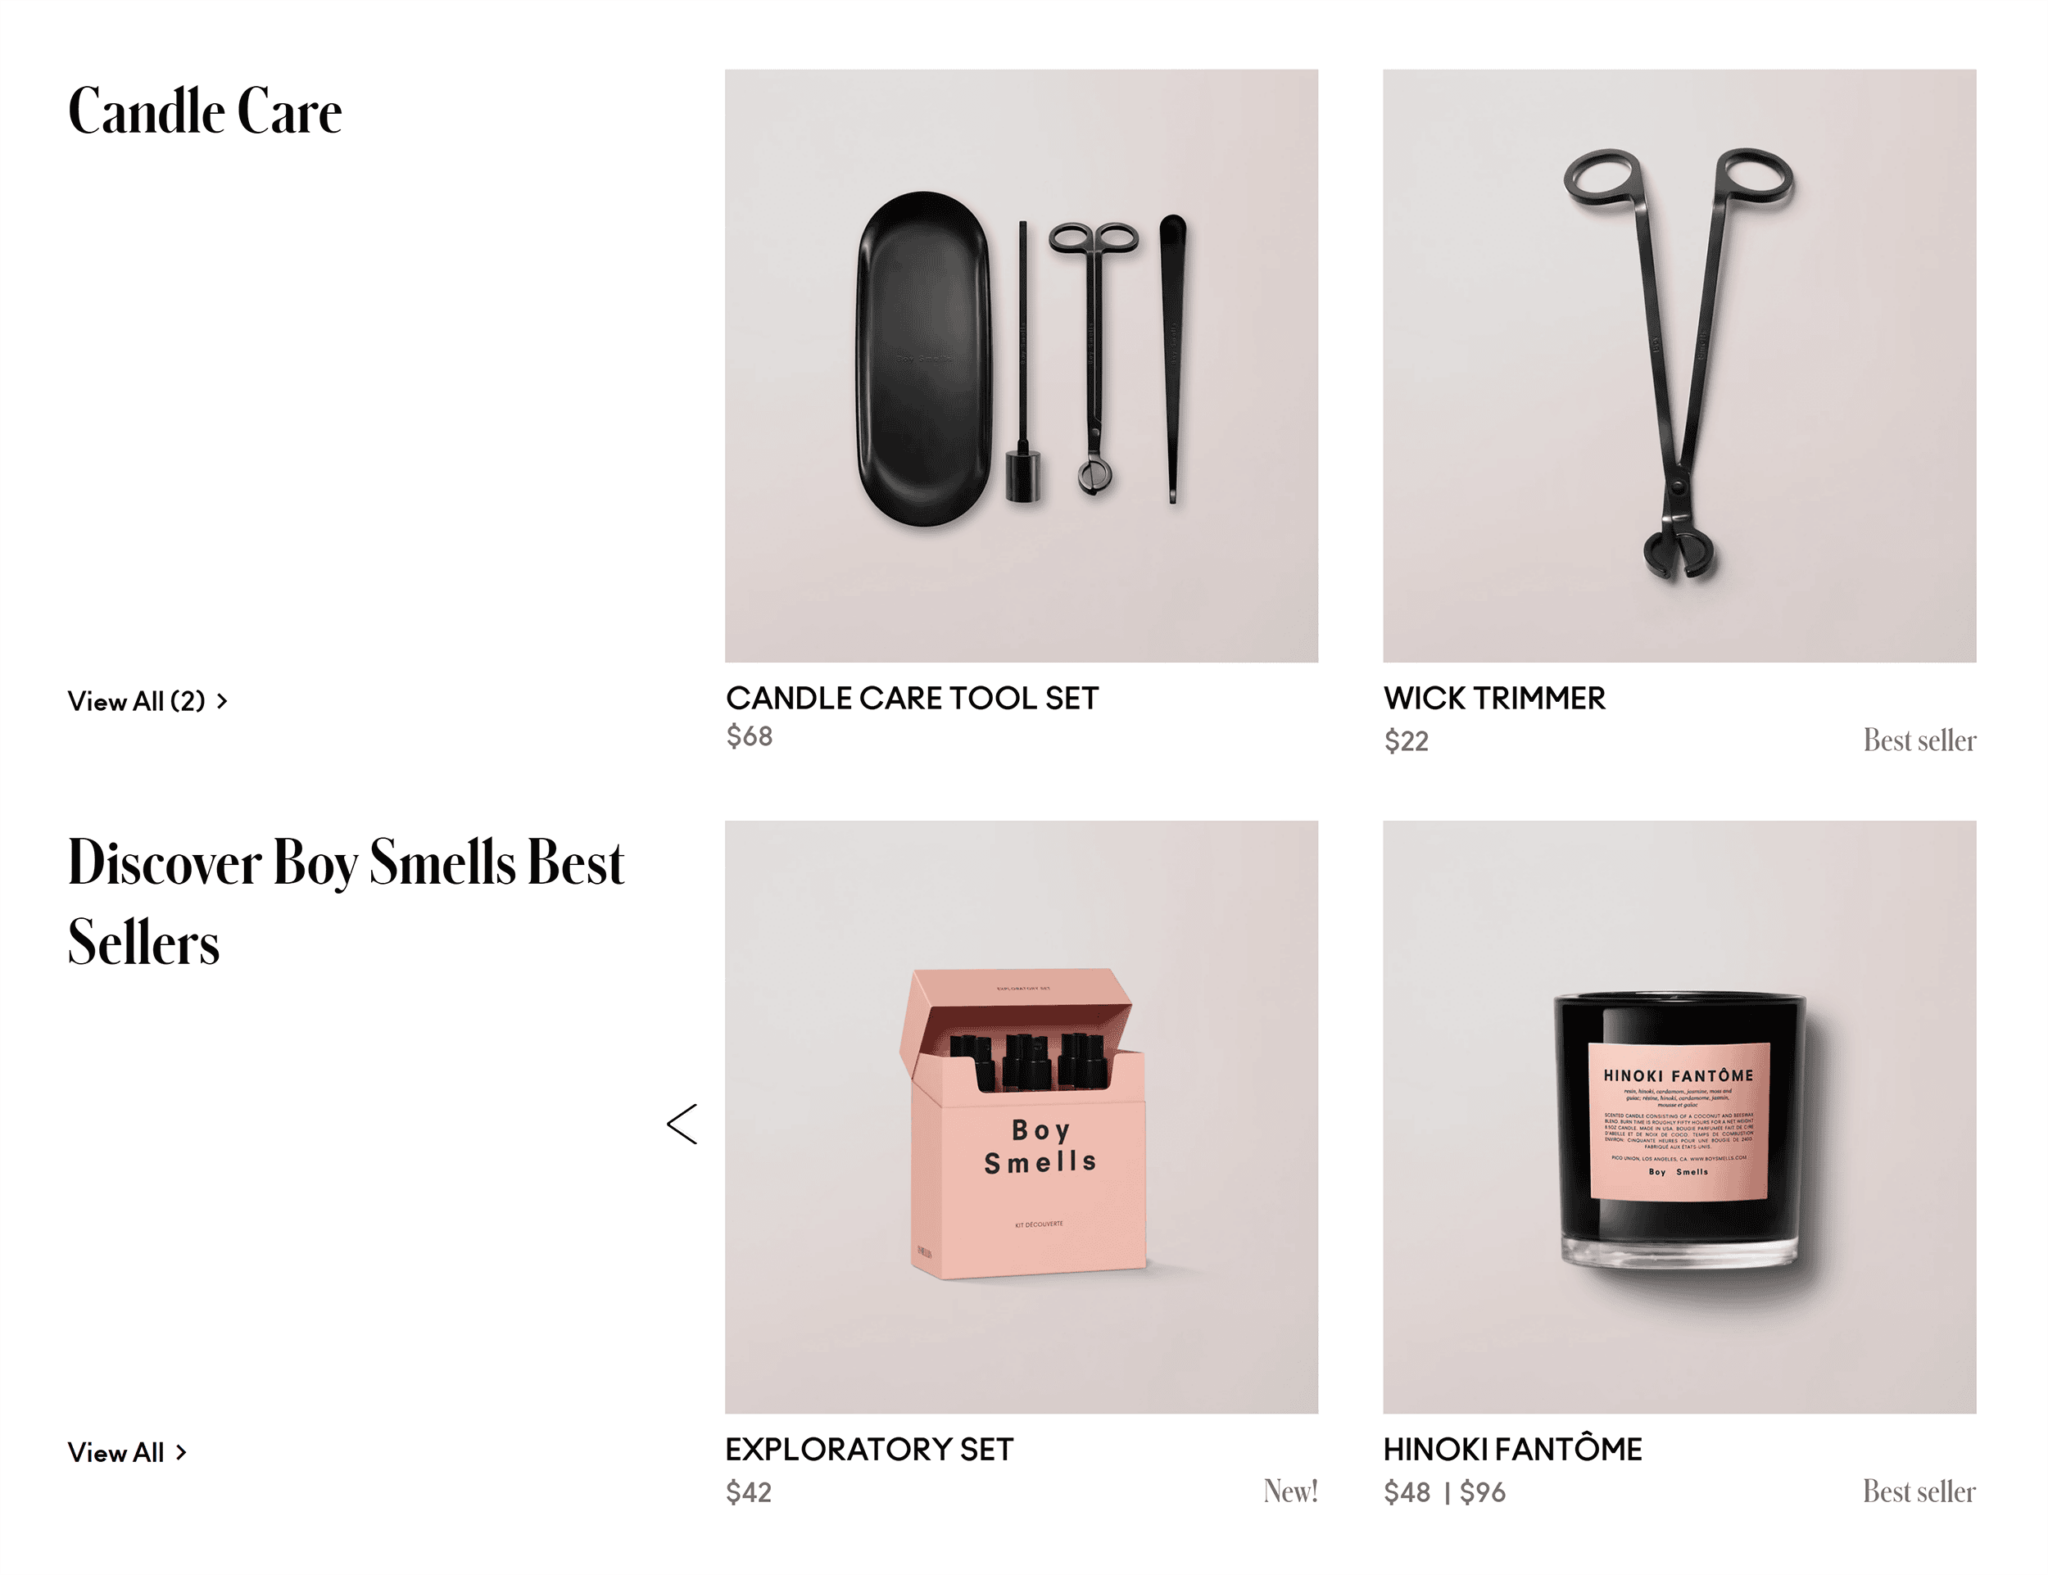 boysmells-quick-shop 20 Effective Product Page Examples (+ Best Practices)